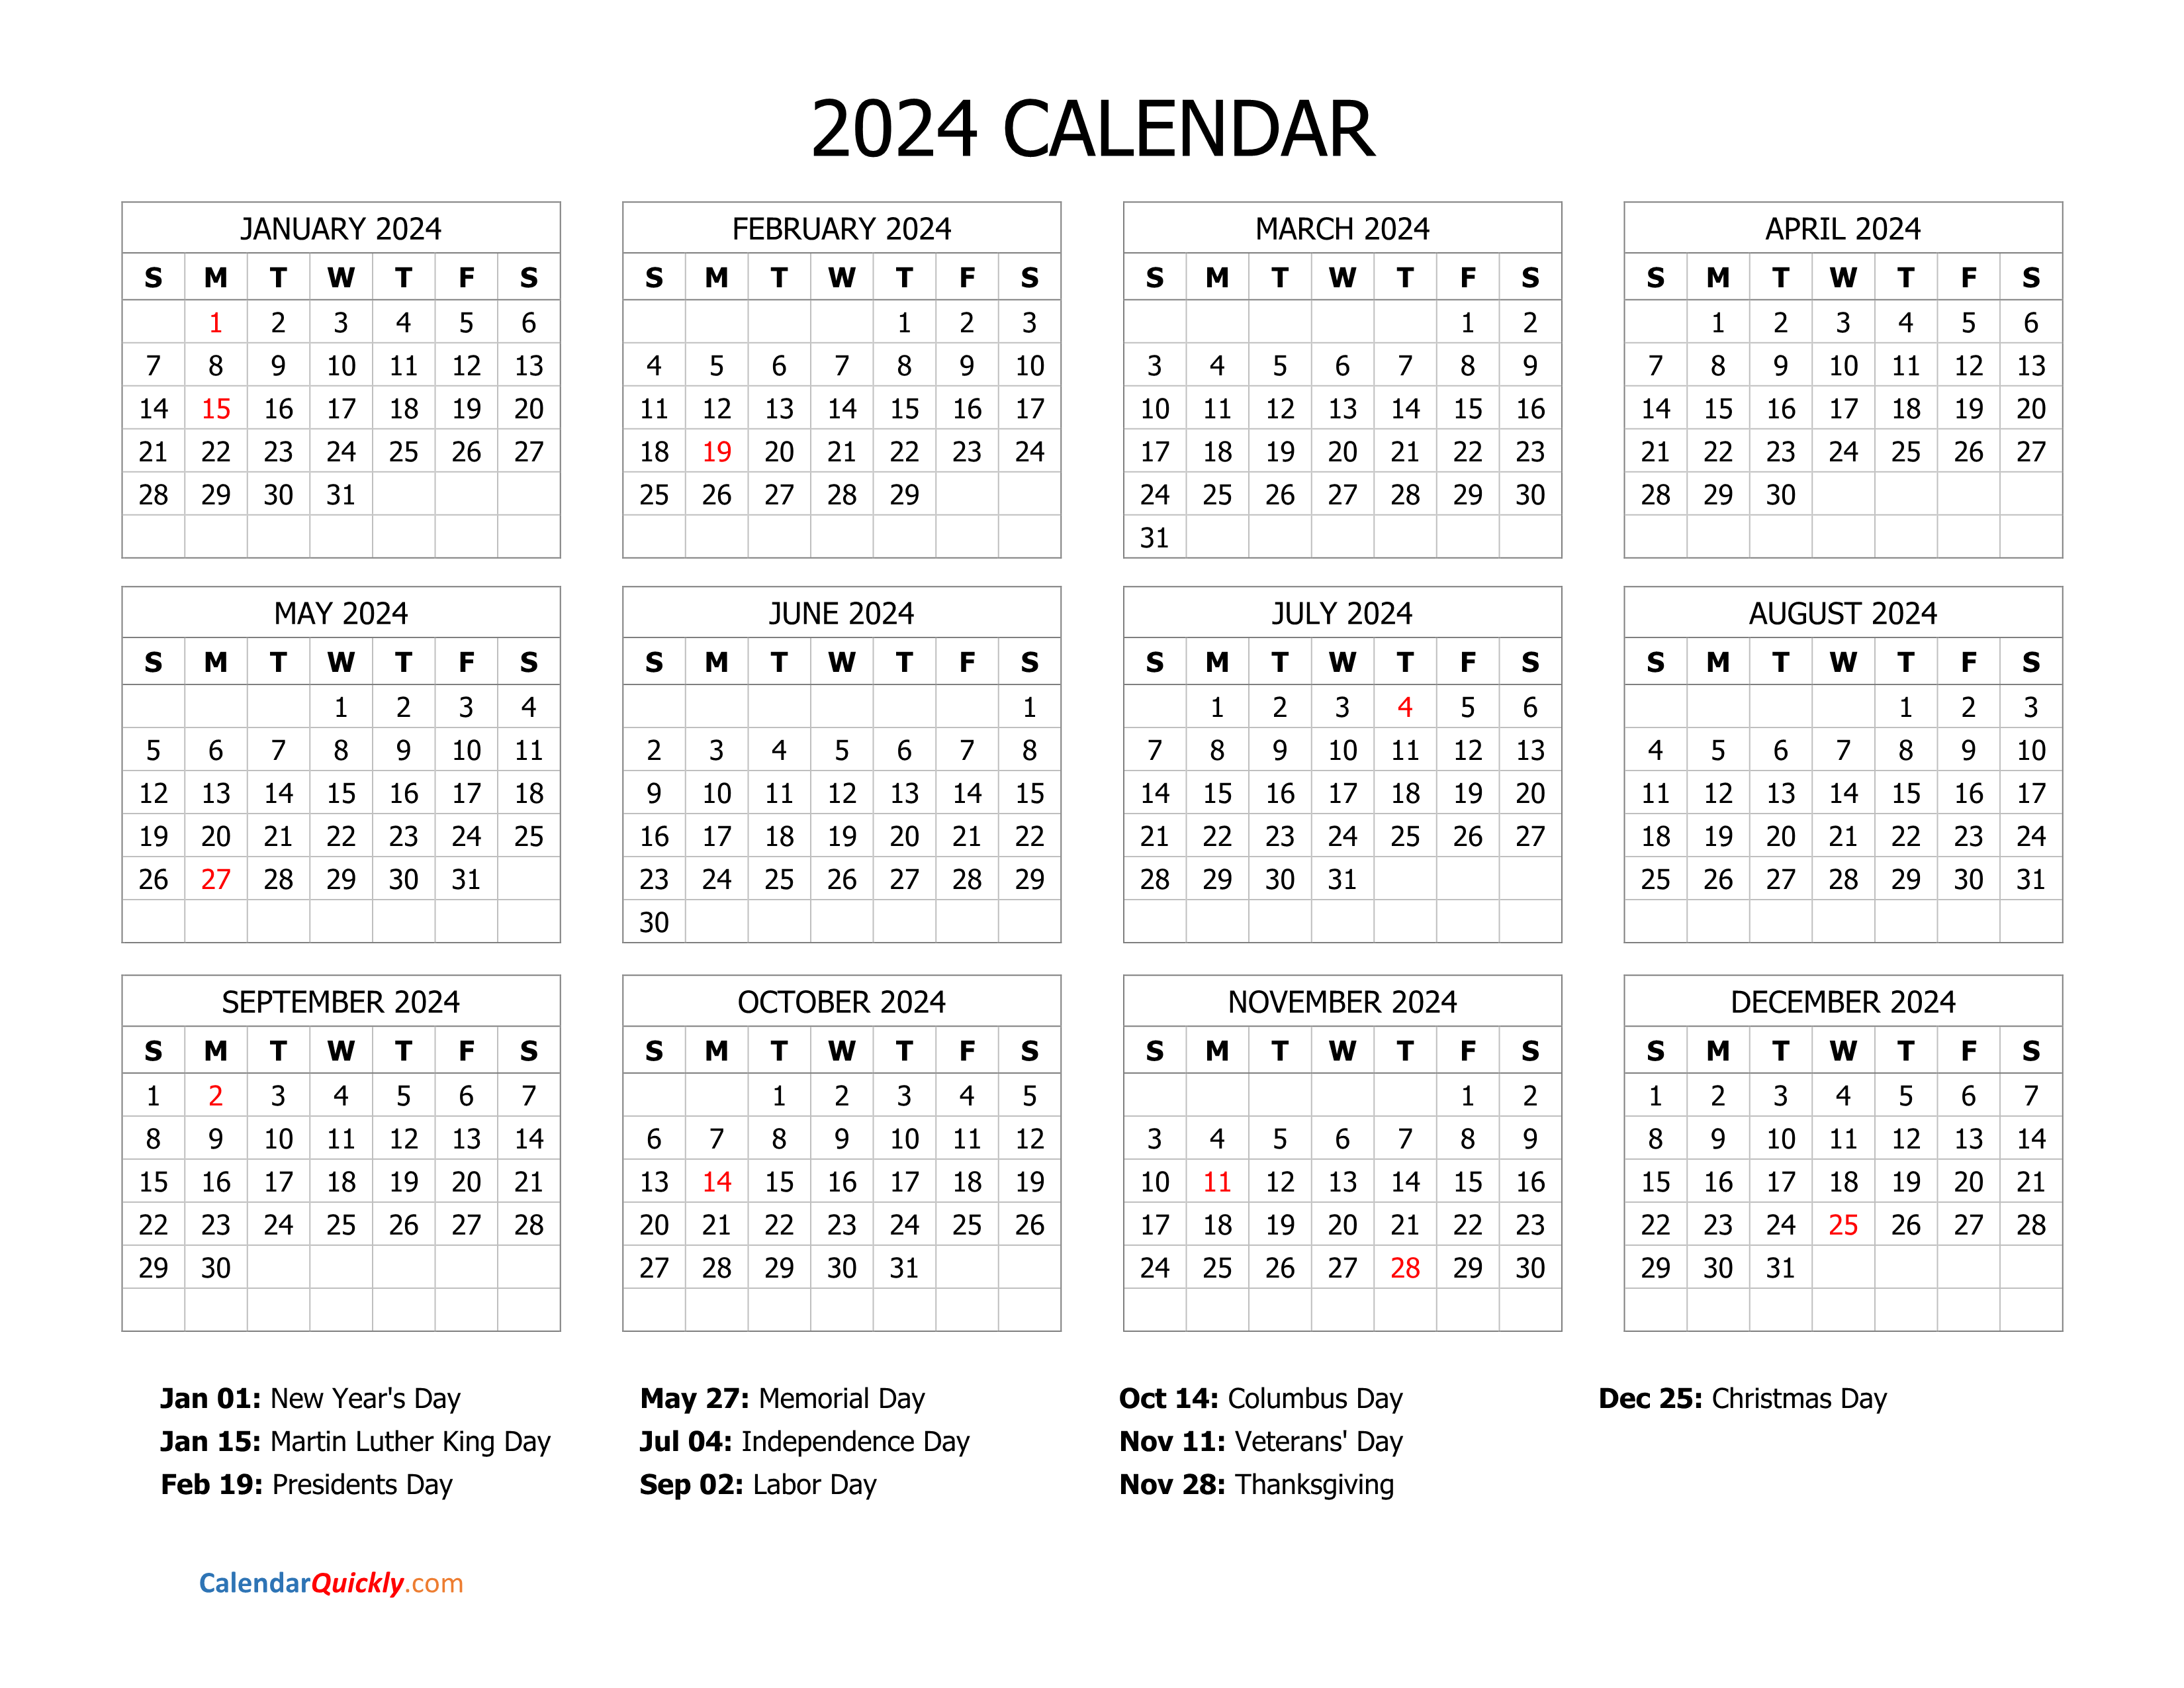 2024 Calendar Free Printable - Free Printable 2024 Calendar With Holidays 11x17